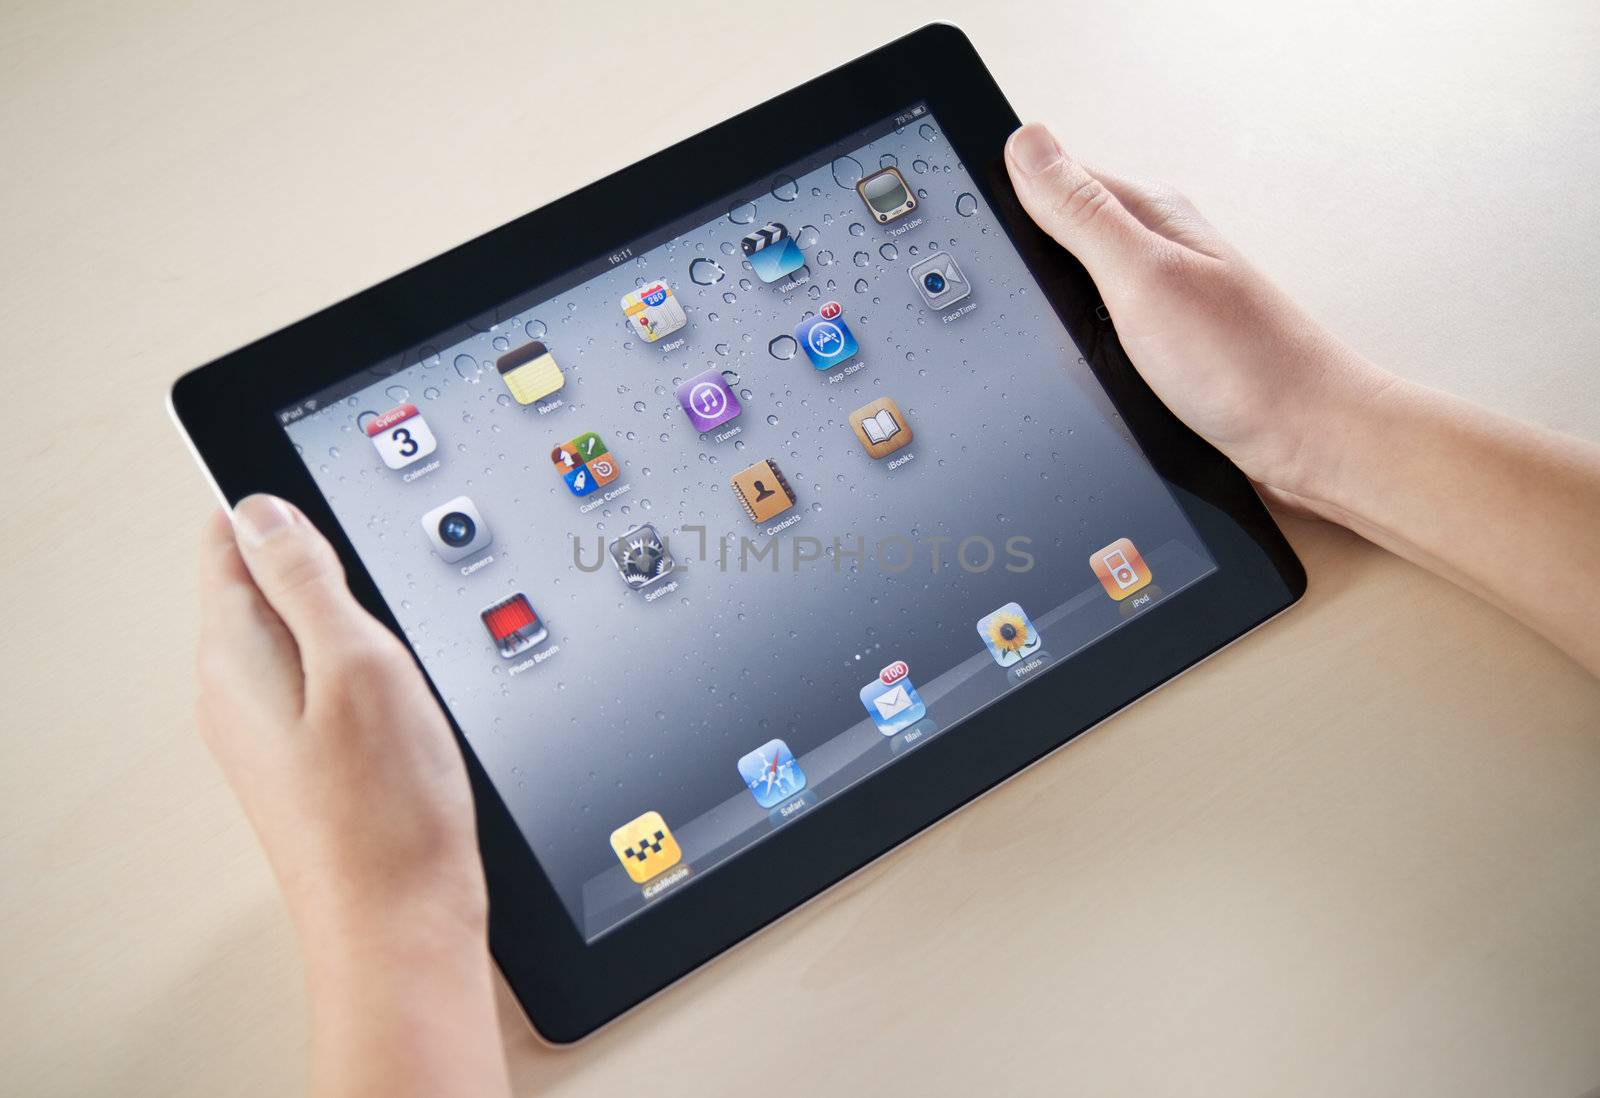 Kiev, Ukraine - December 03, 2011: Woman hands holding Apple iPad2 with homepage on a screen. This second generation Apple iPad2 is designed and development by Apple inc. and launched in march 2011.